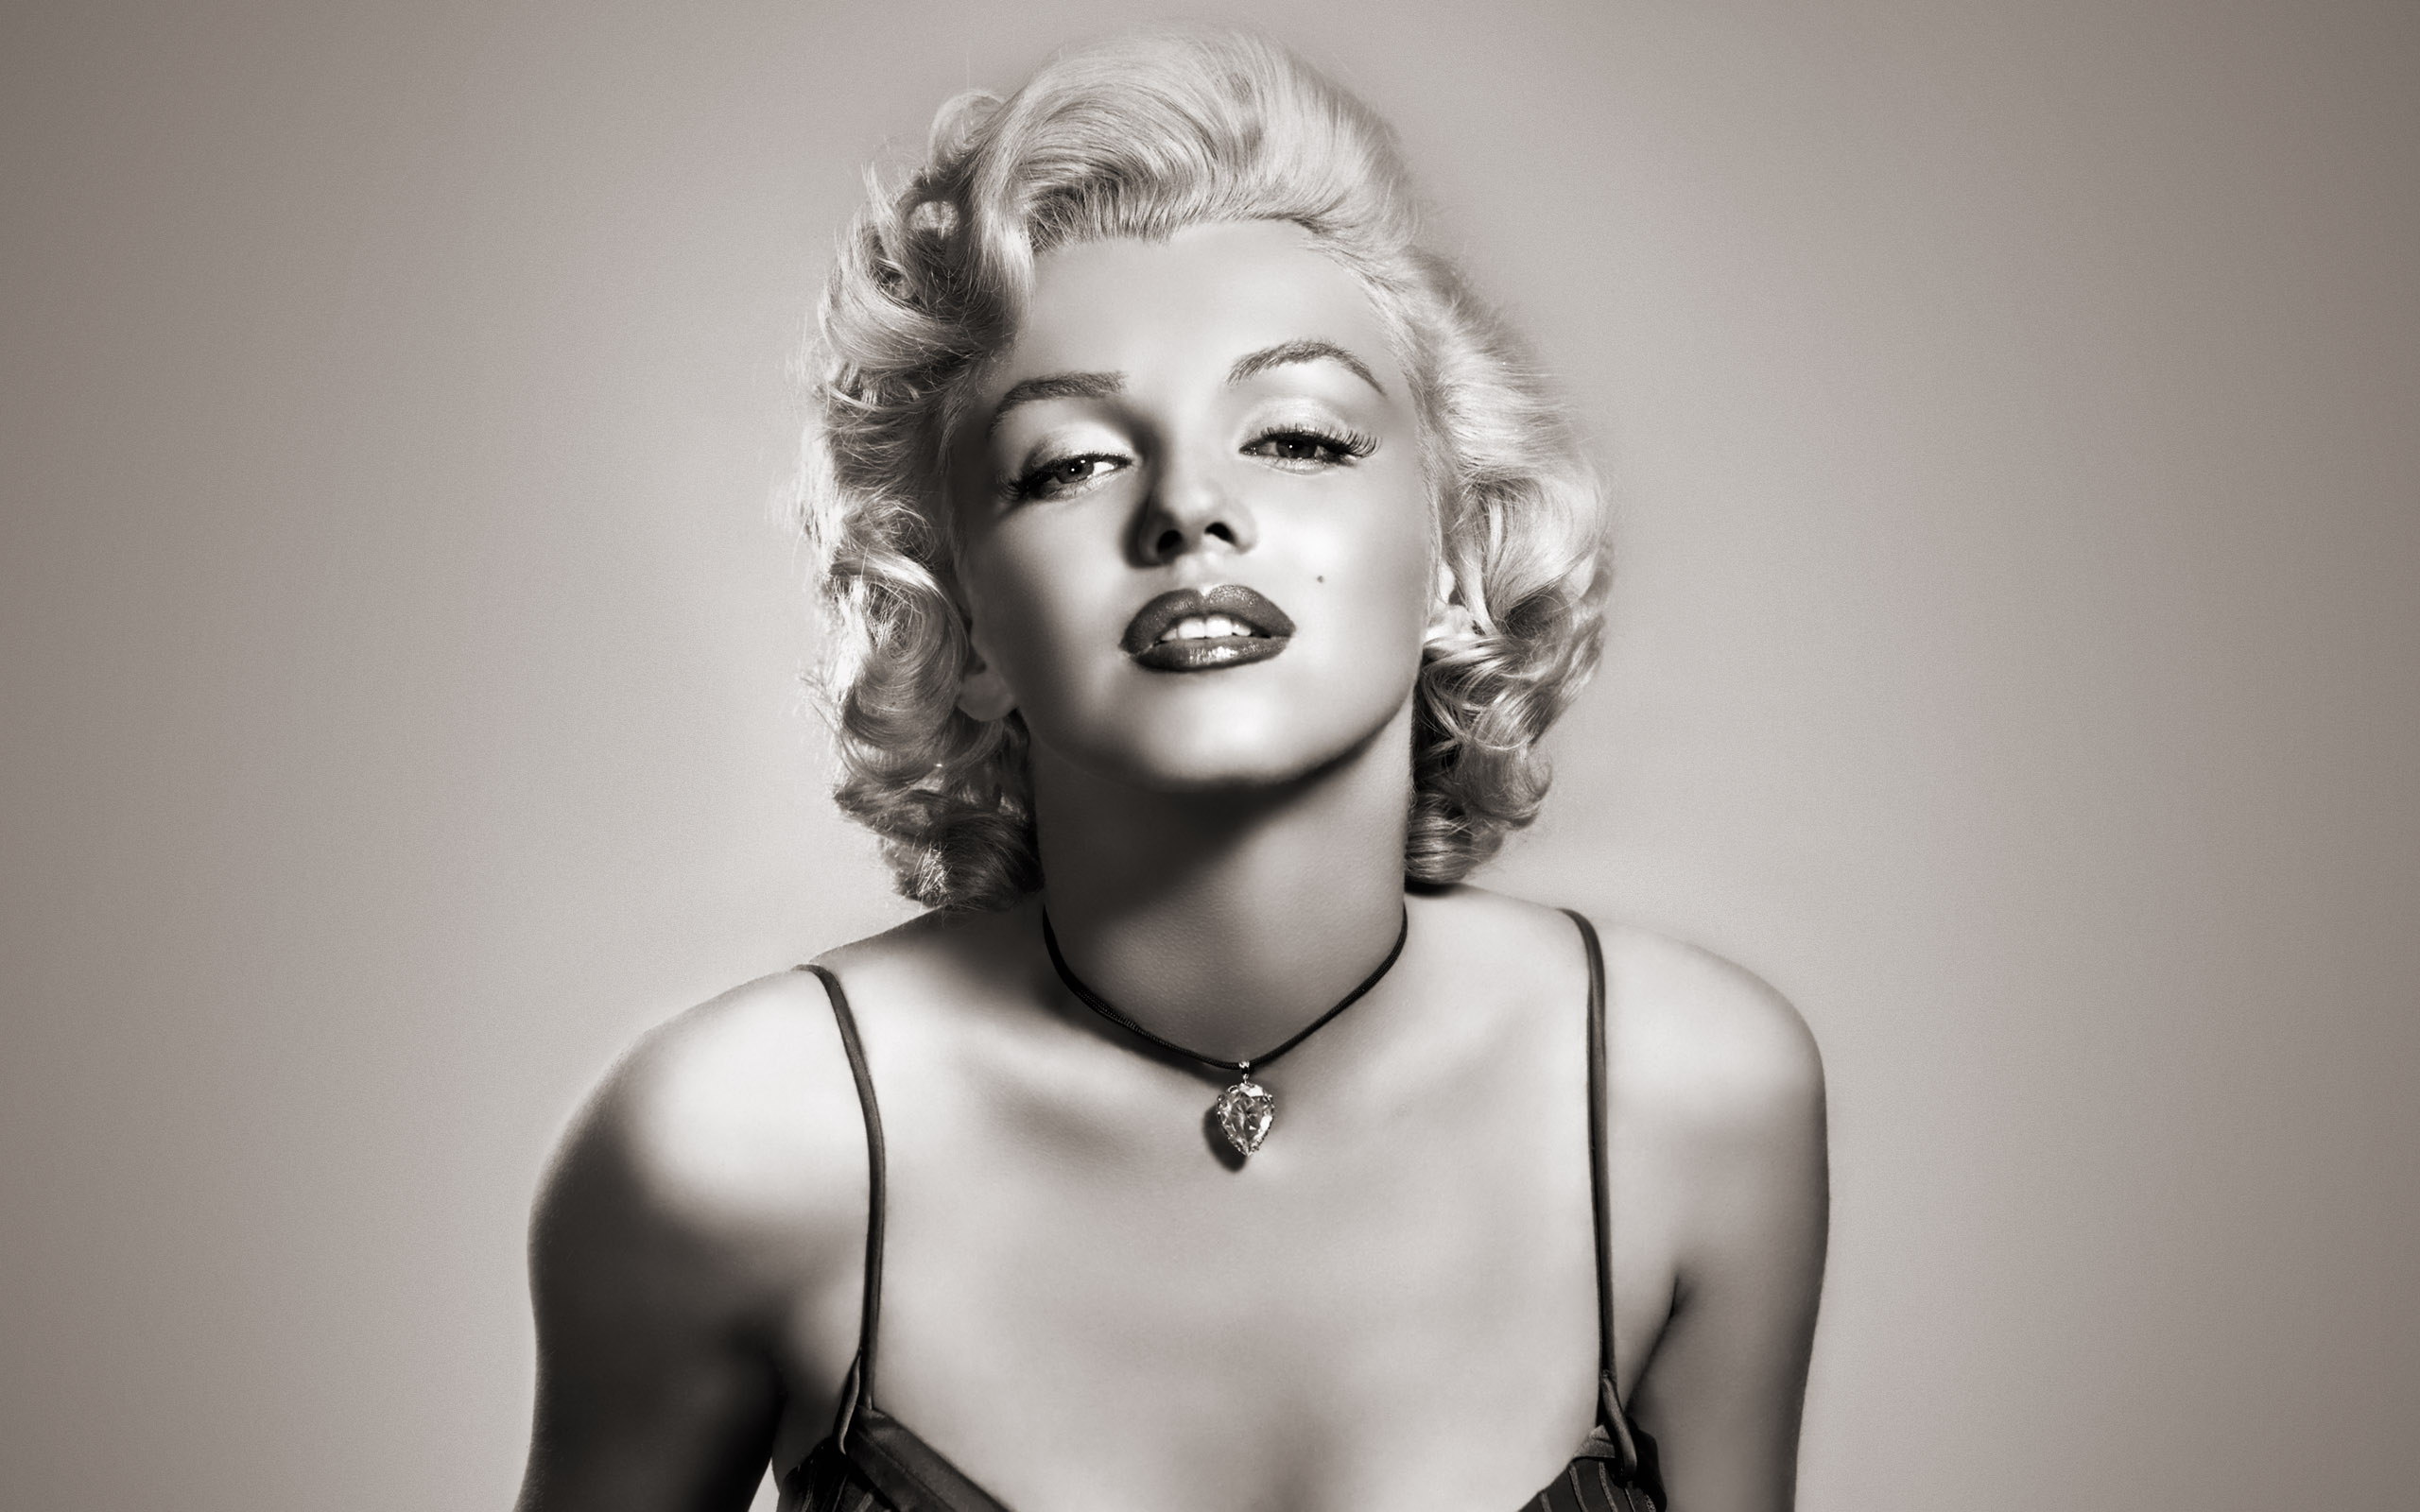 The 10 Most Iconic Moments of Marilyn Monroe | Jetss